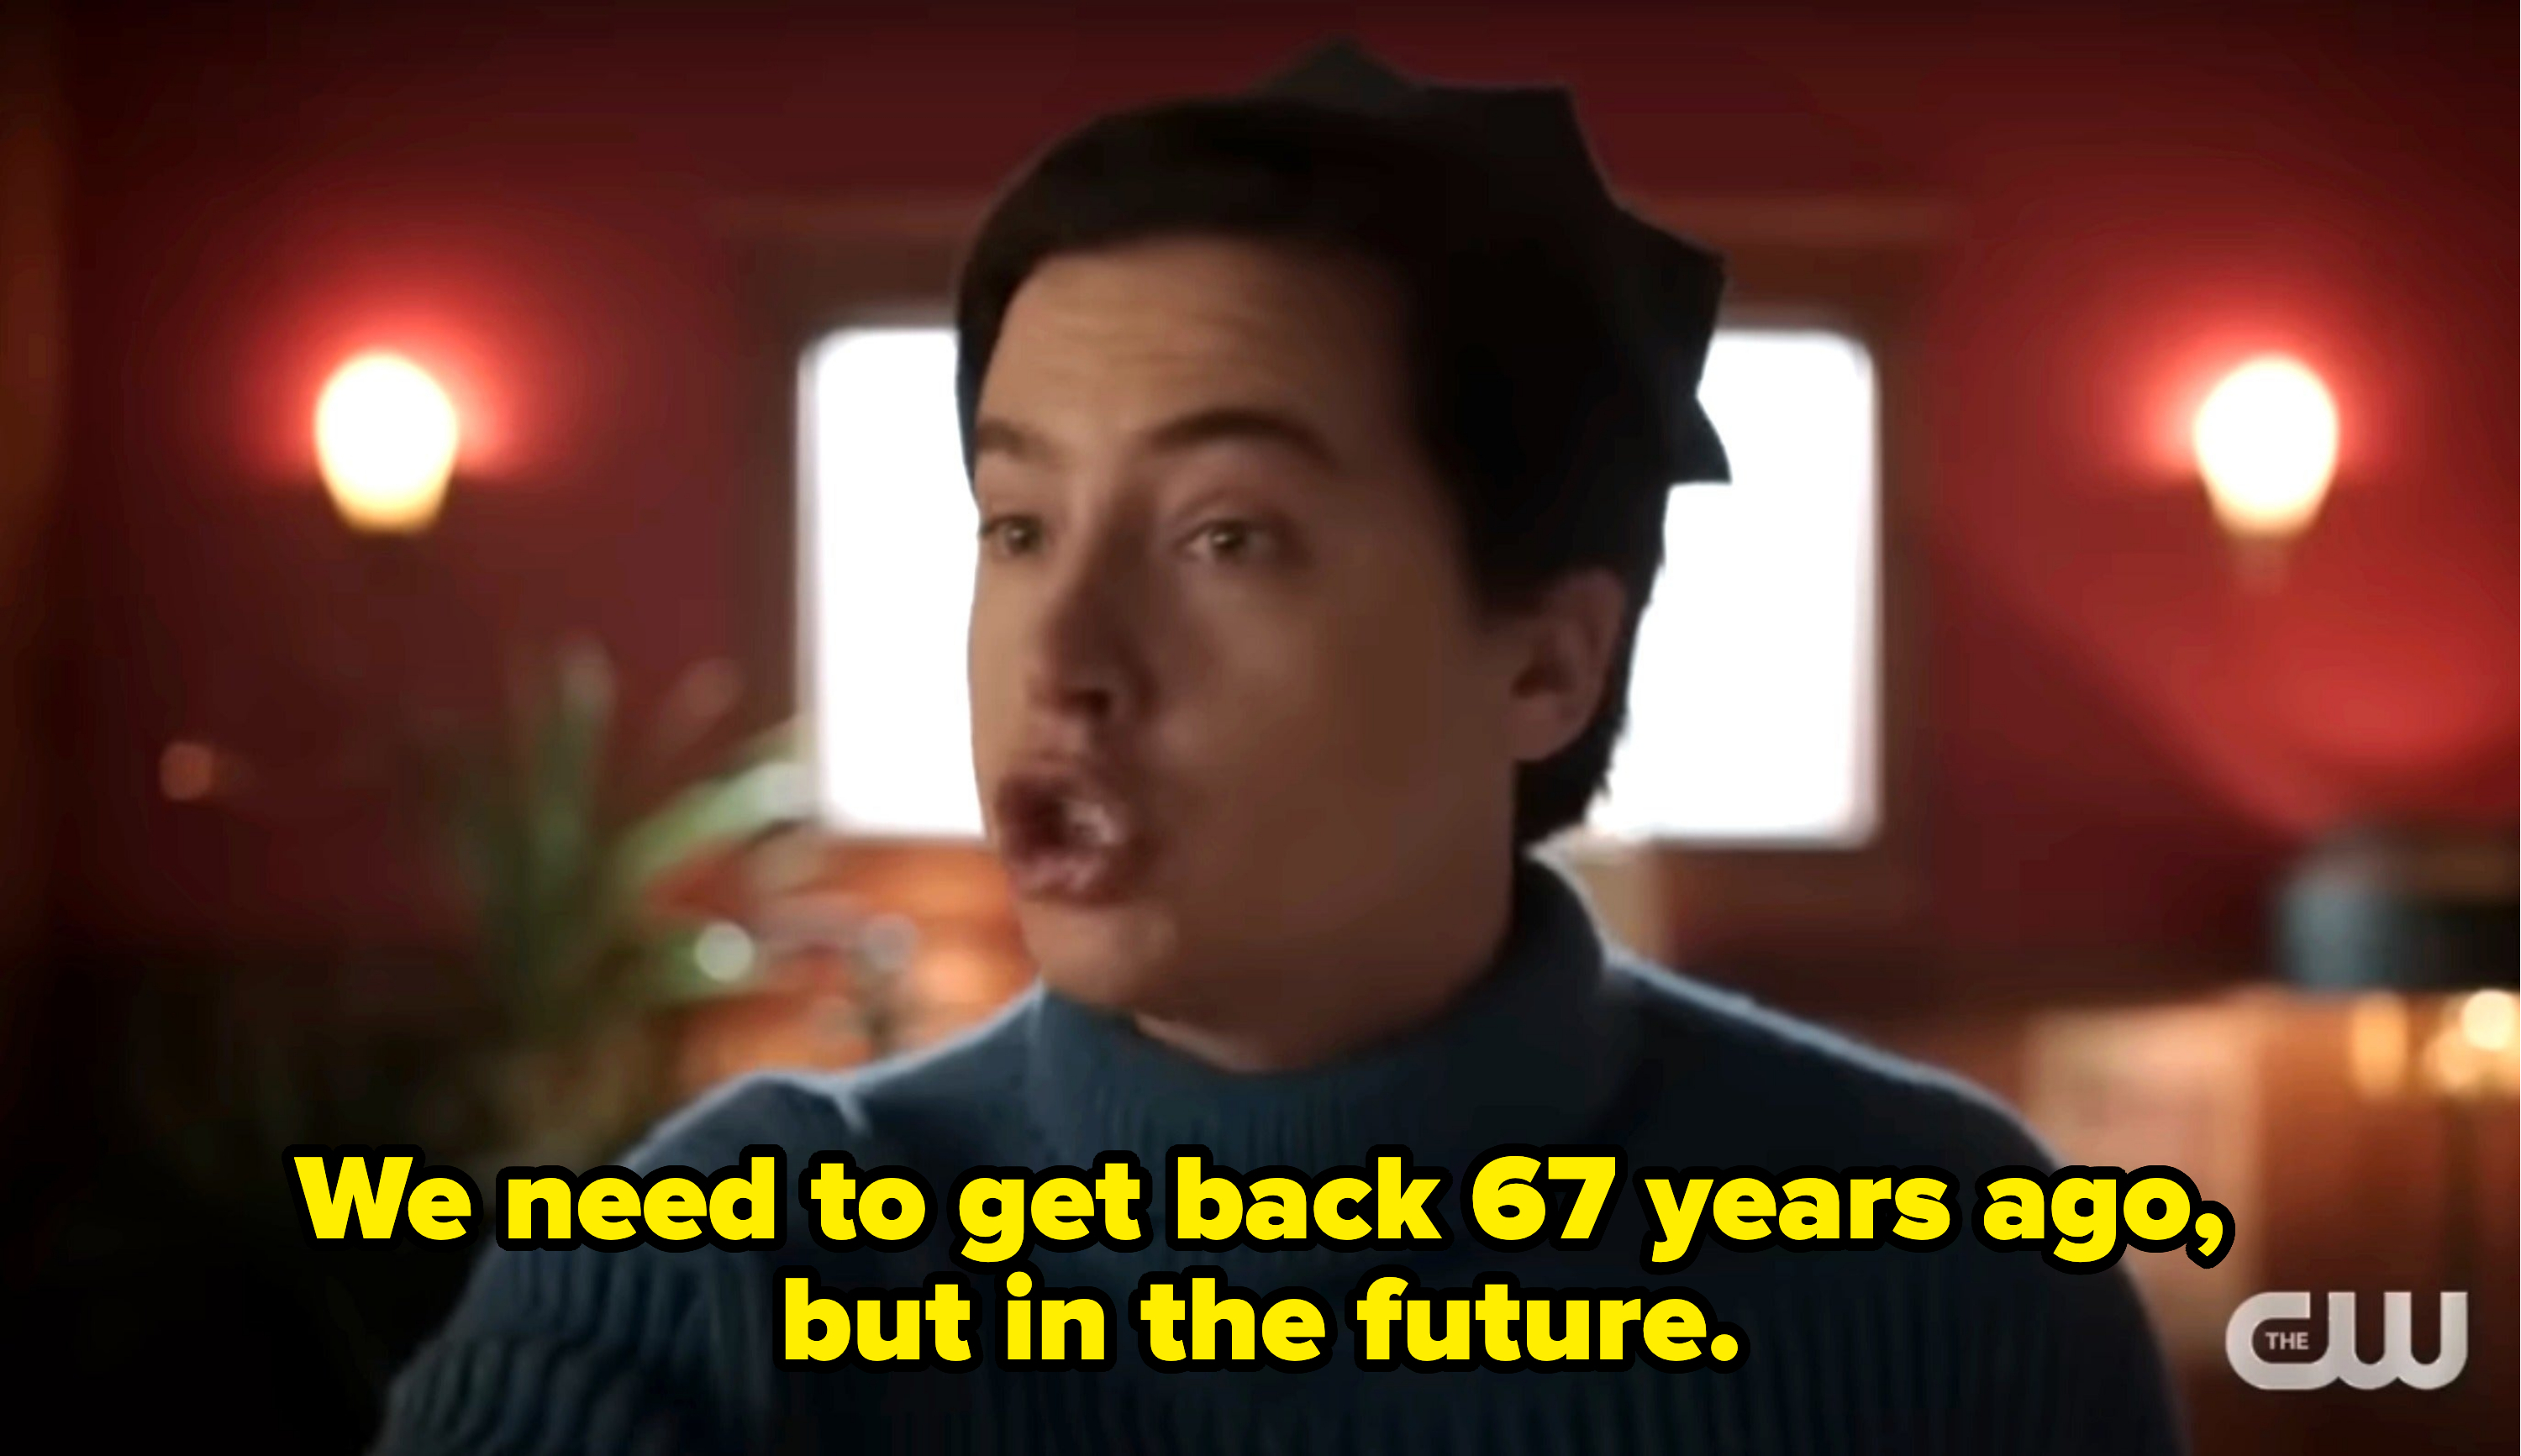 Jughead says, &quot;We need to get back 67 years ago, but in the future&quot;